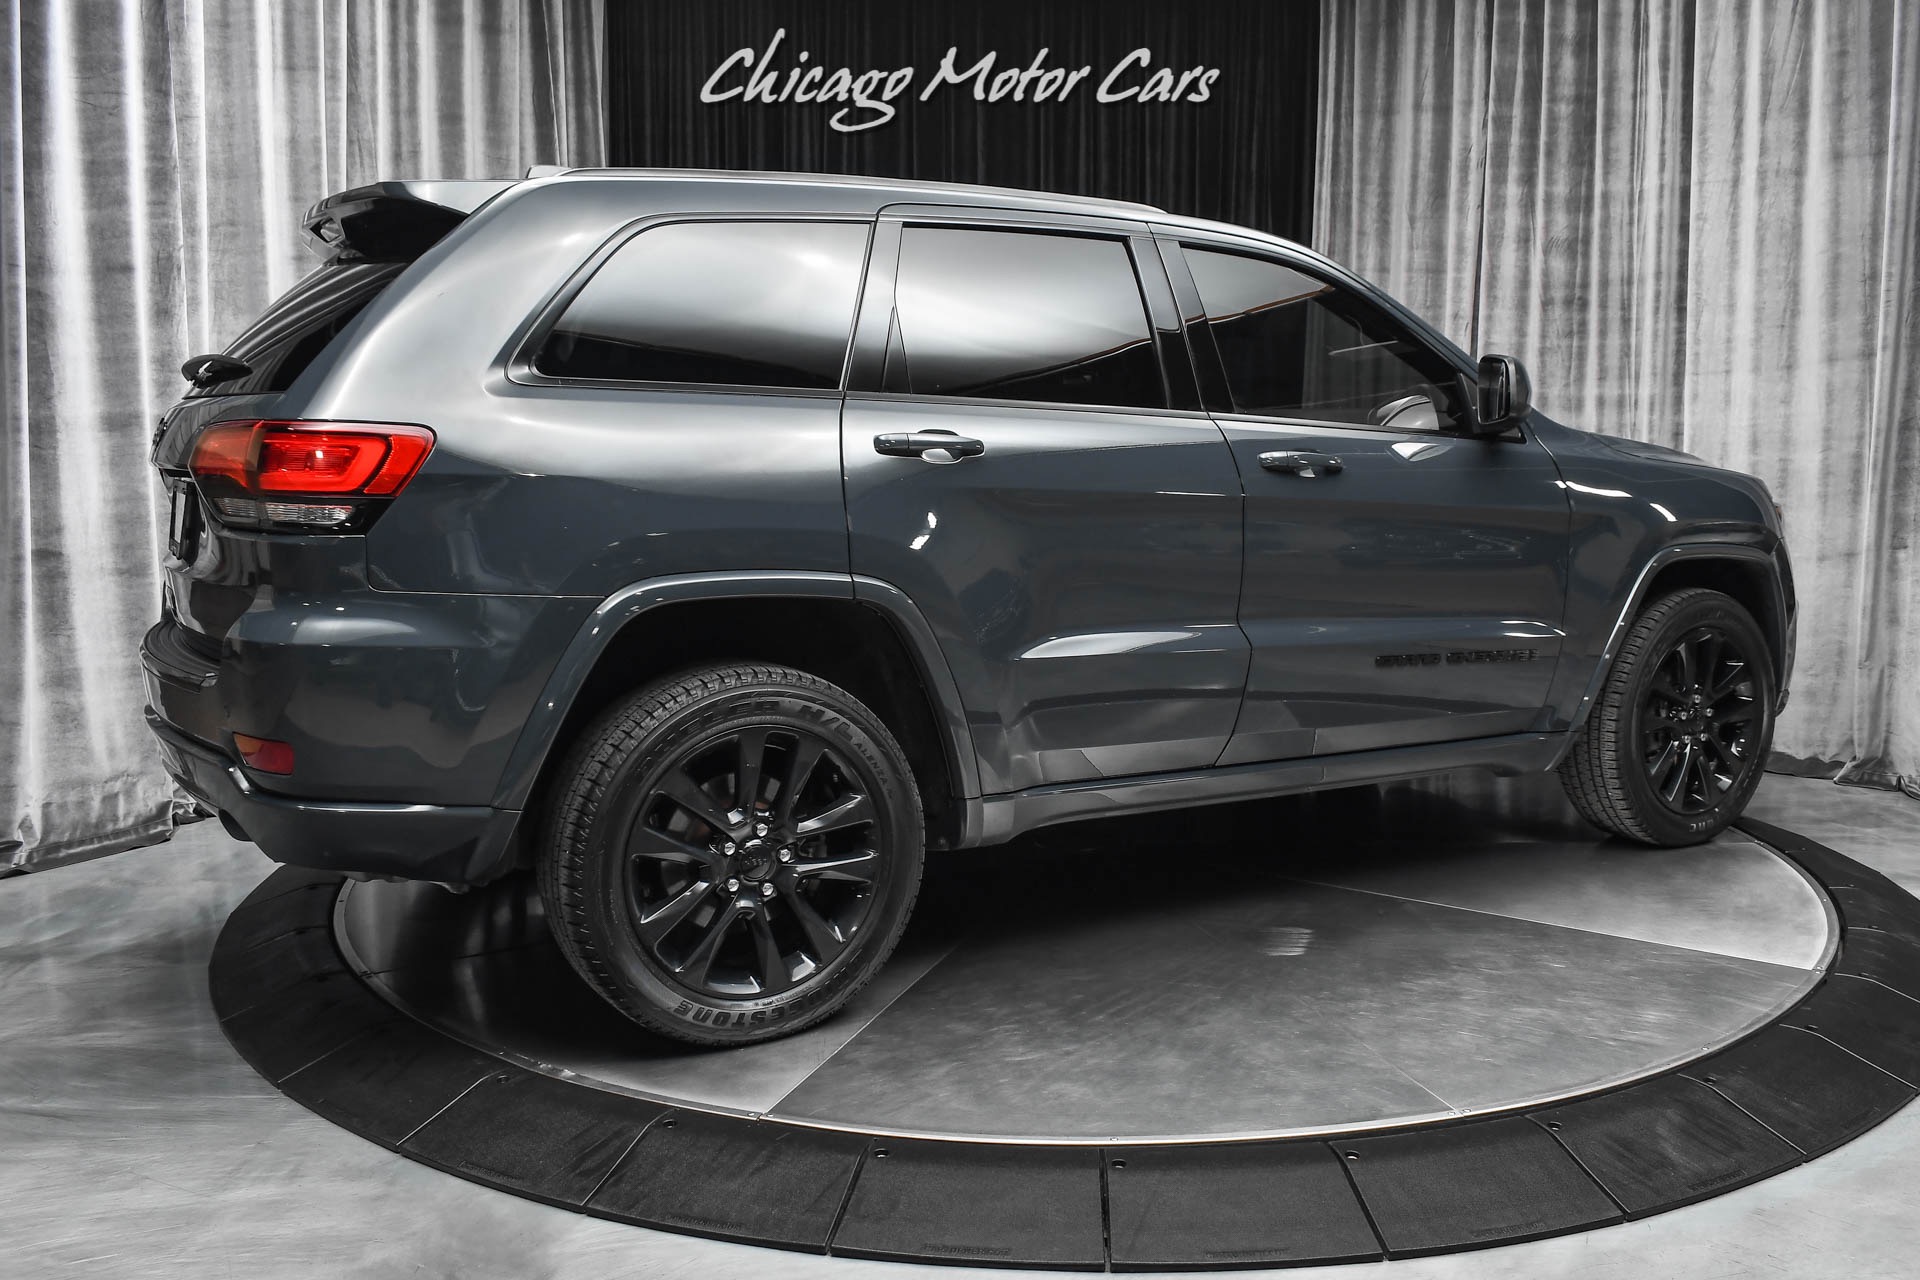 https://www.chicagomotorcars.com/imagetag/9249/5/l/Used-2017-Jeep-Grand-Cherokee-Altitude-SUV-RARE-Rhino-Grey-Paint-UConnect-84-Display-20inch-Wheels.jpg